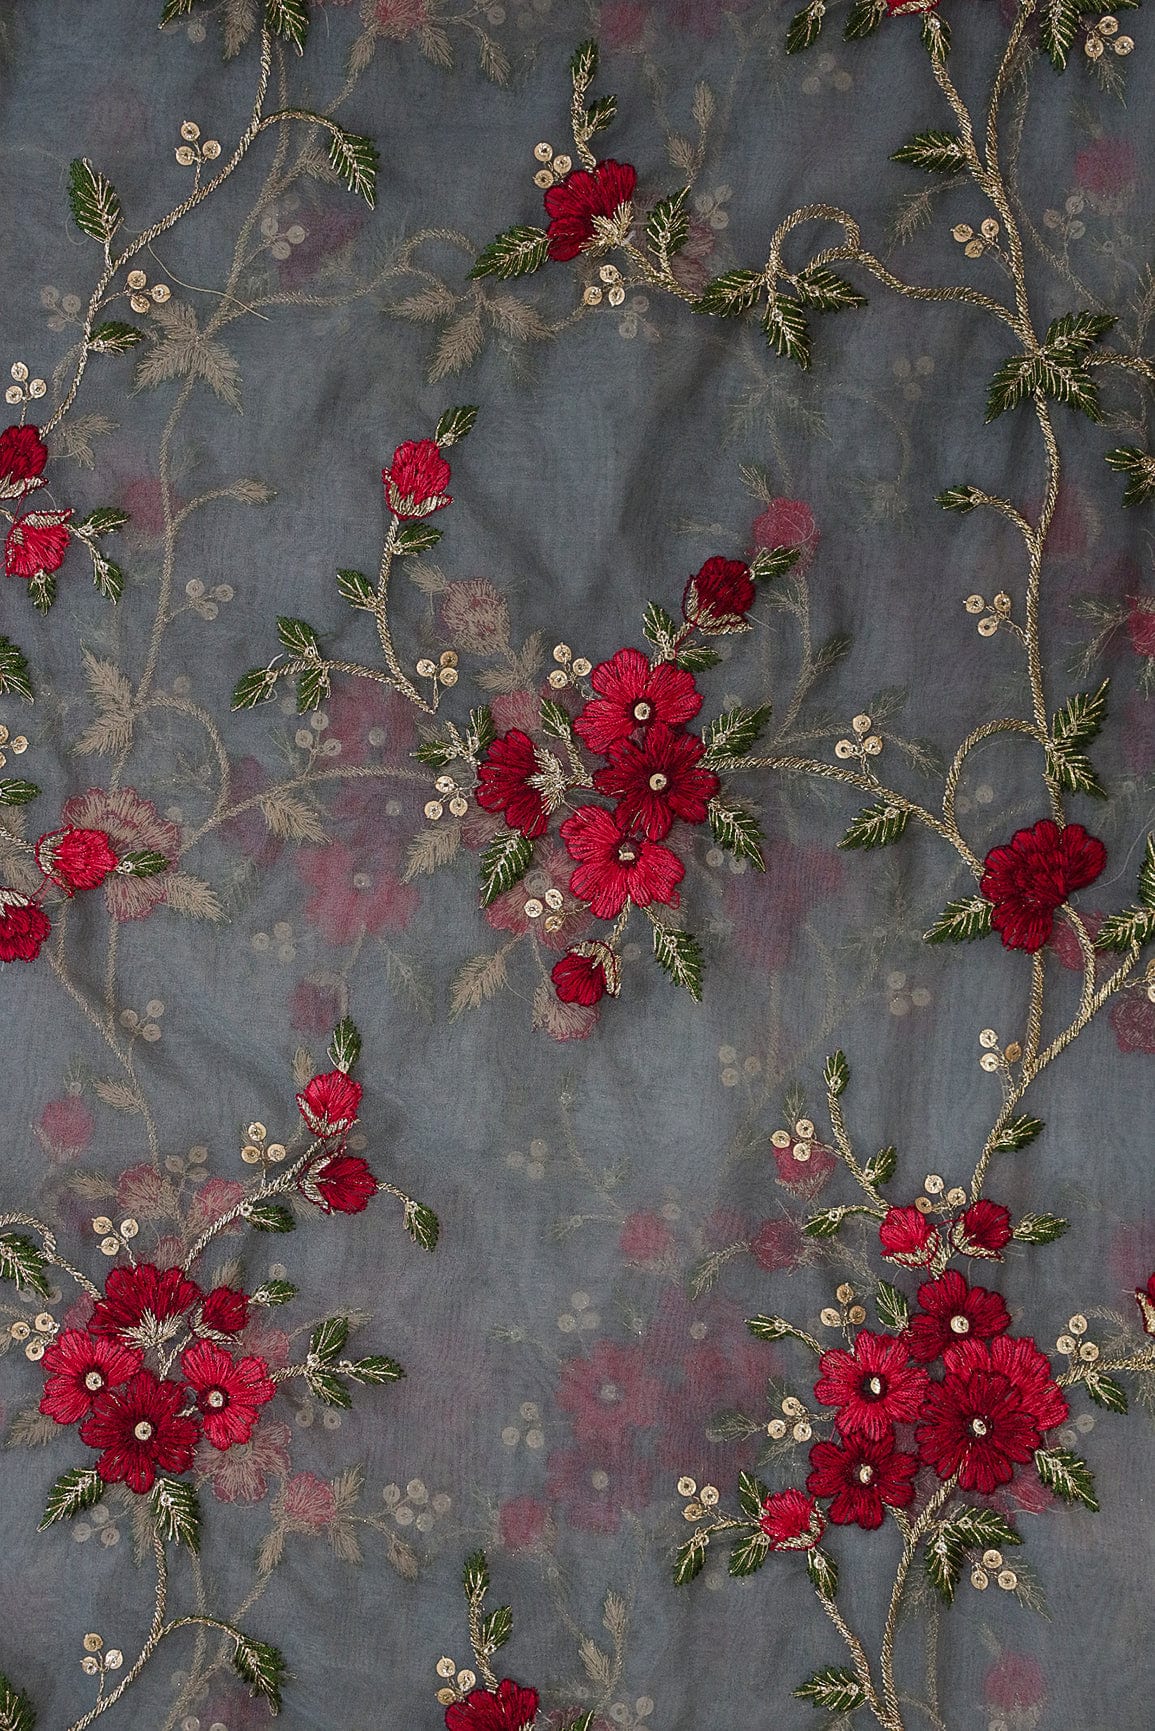 doeraa Embroidery Fabrics 1.75 Meter Cut Piece Of Red And Olive Thread With Gold Zari Floral Embroidery On Grey Organza Fabric